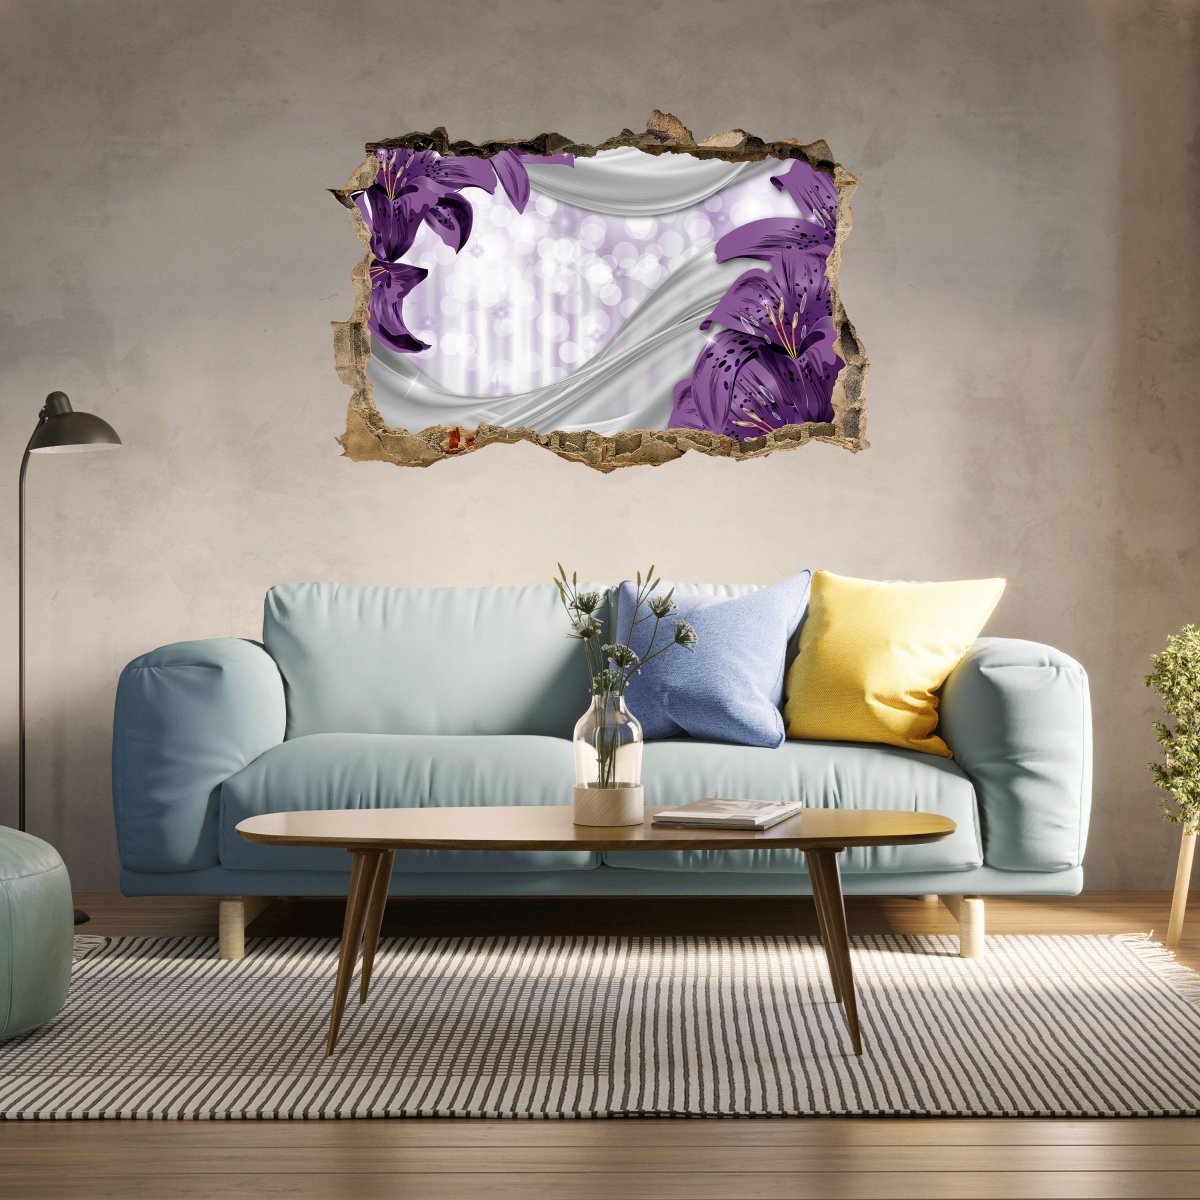 3D wall sticker lily purple abstract - Wall Decal M0526